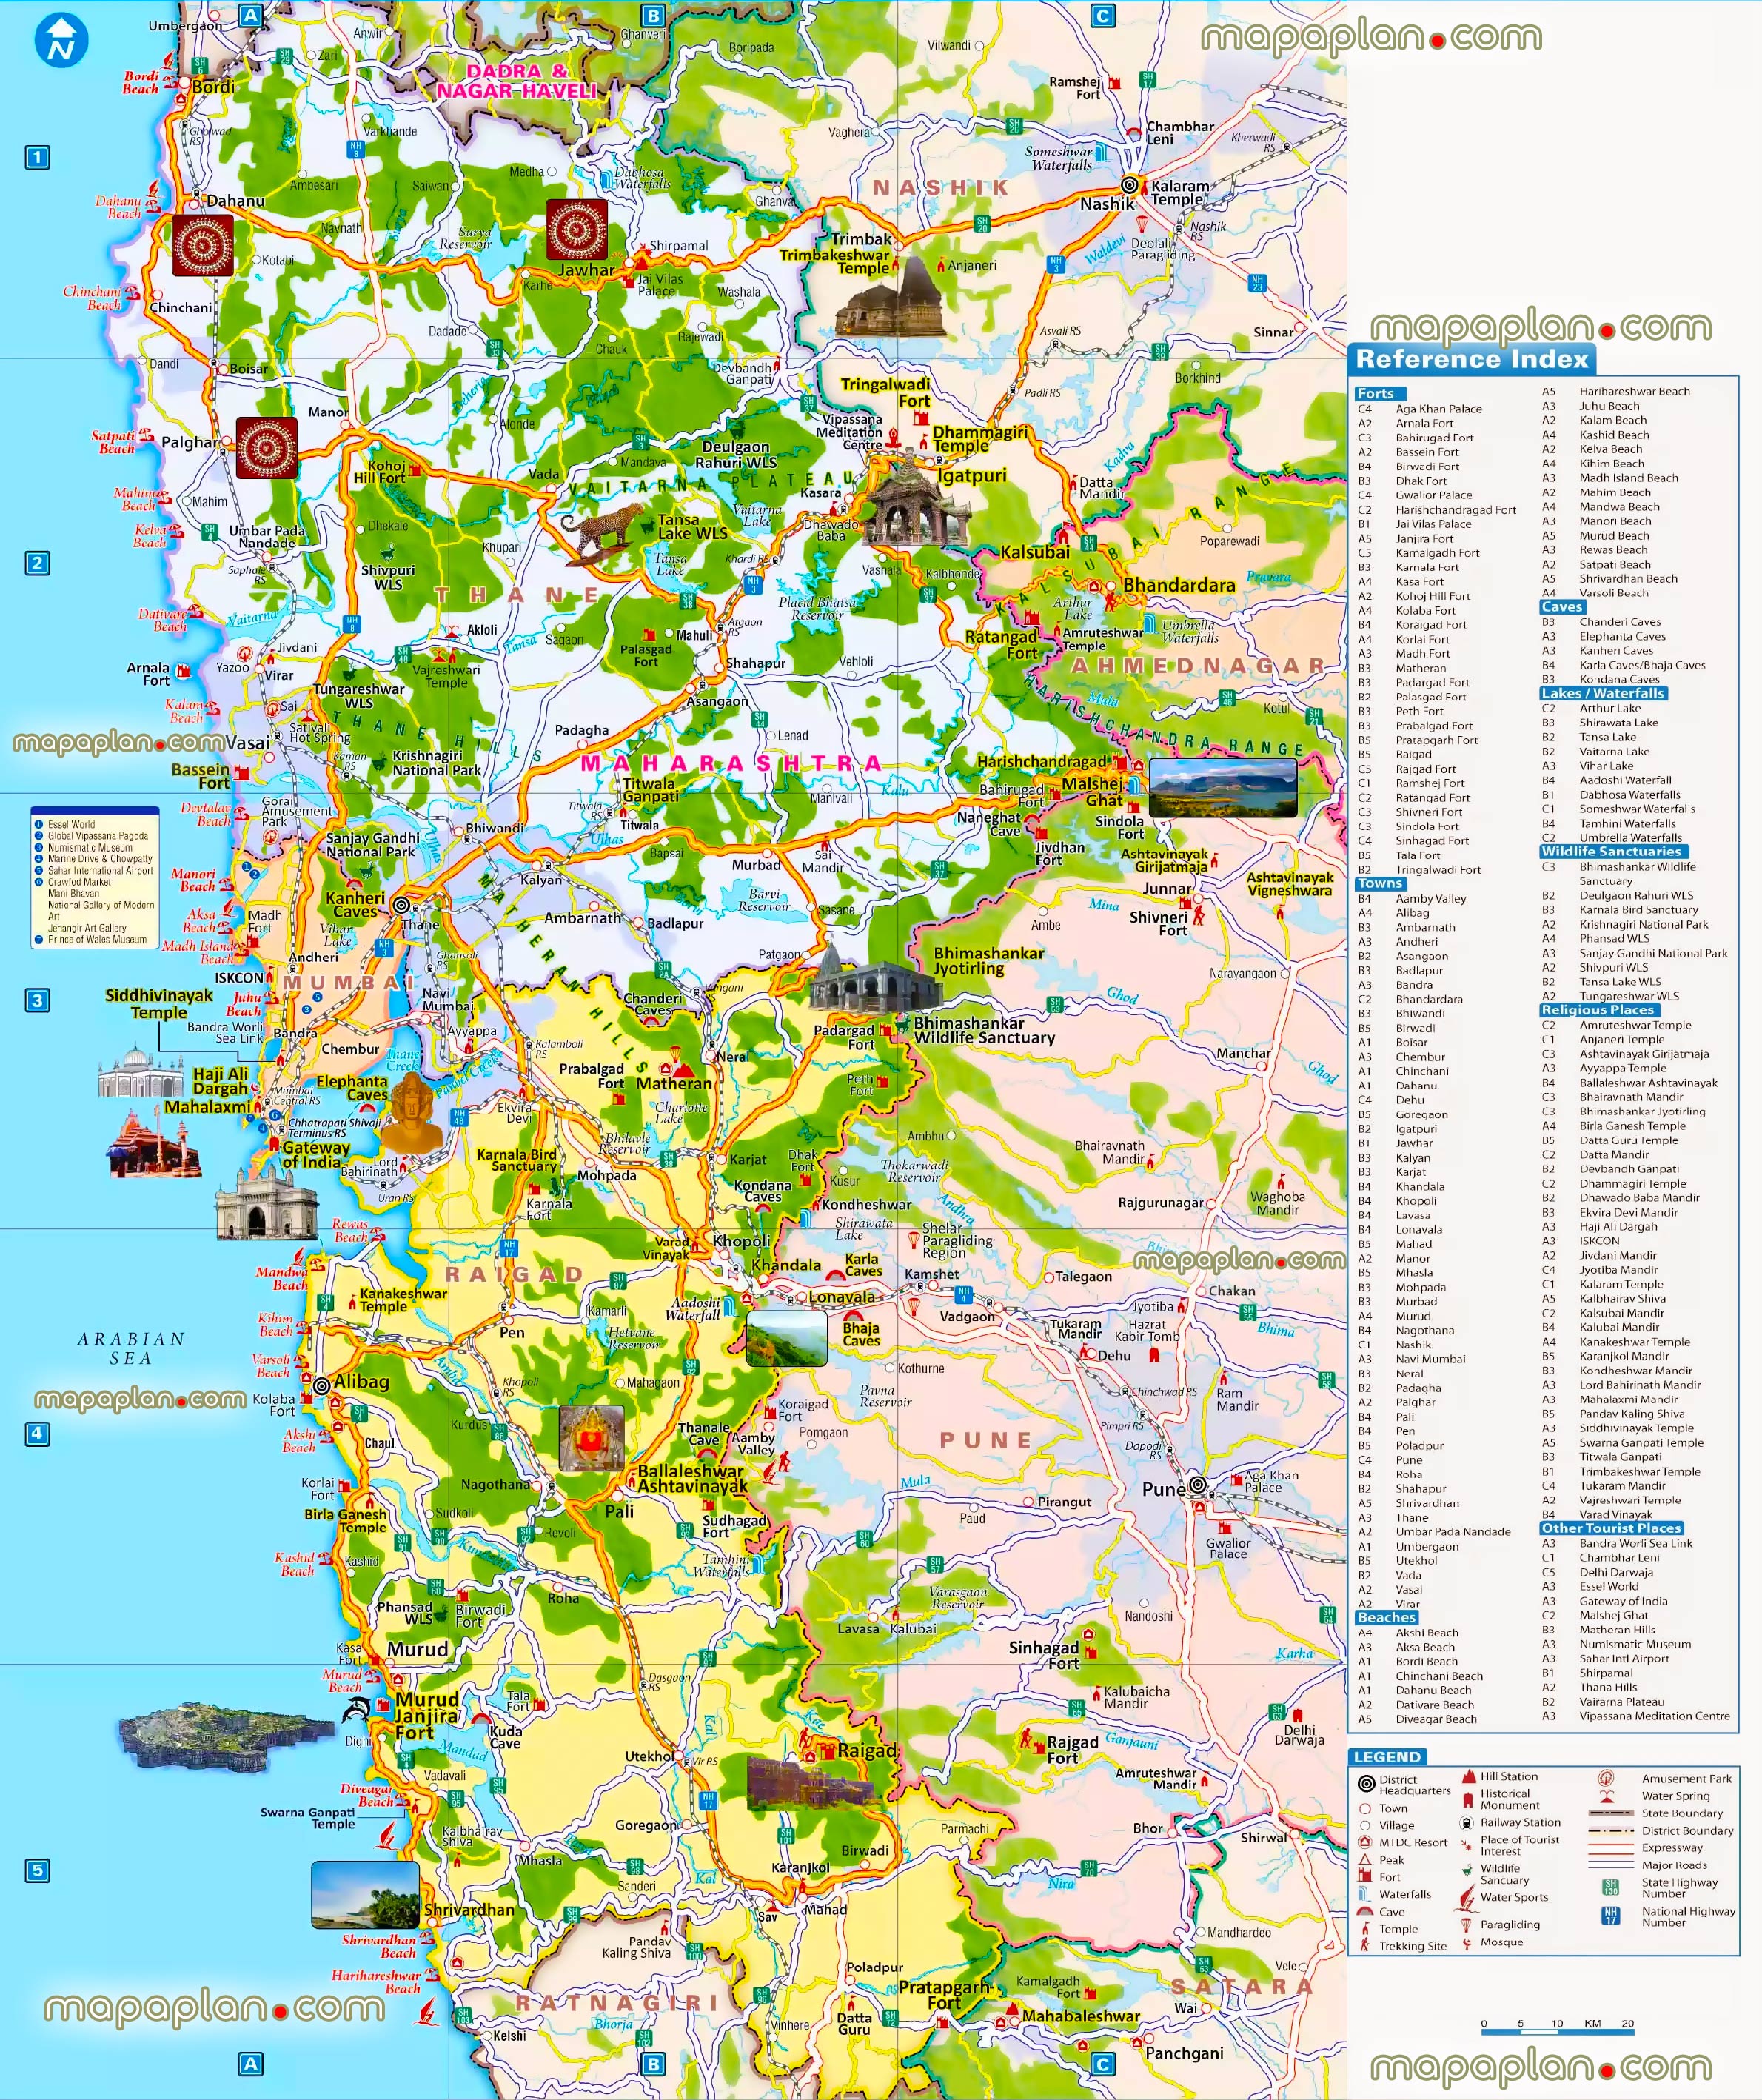 bombay metropolitan region surrounding suburbs cities towns villages places visitors top attractions india offline download virtual interactive hd plan overview region trip highlights high quality large scale vector aerial satellite poster roads view zoning main district areas municipal regionss Mumbai Top tourist attractions map